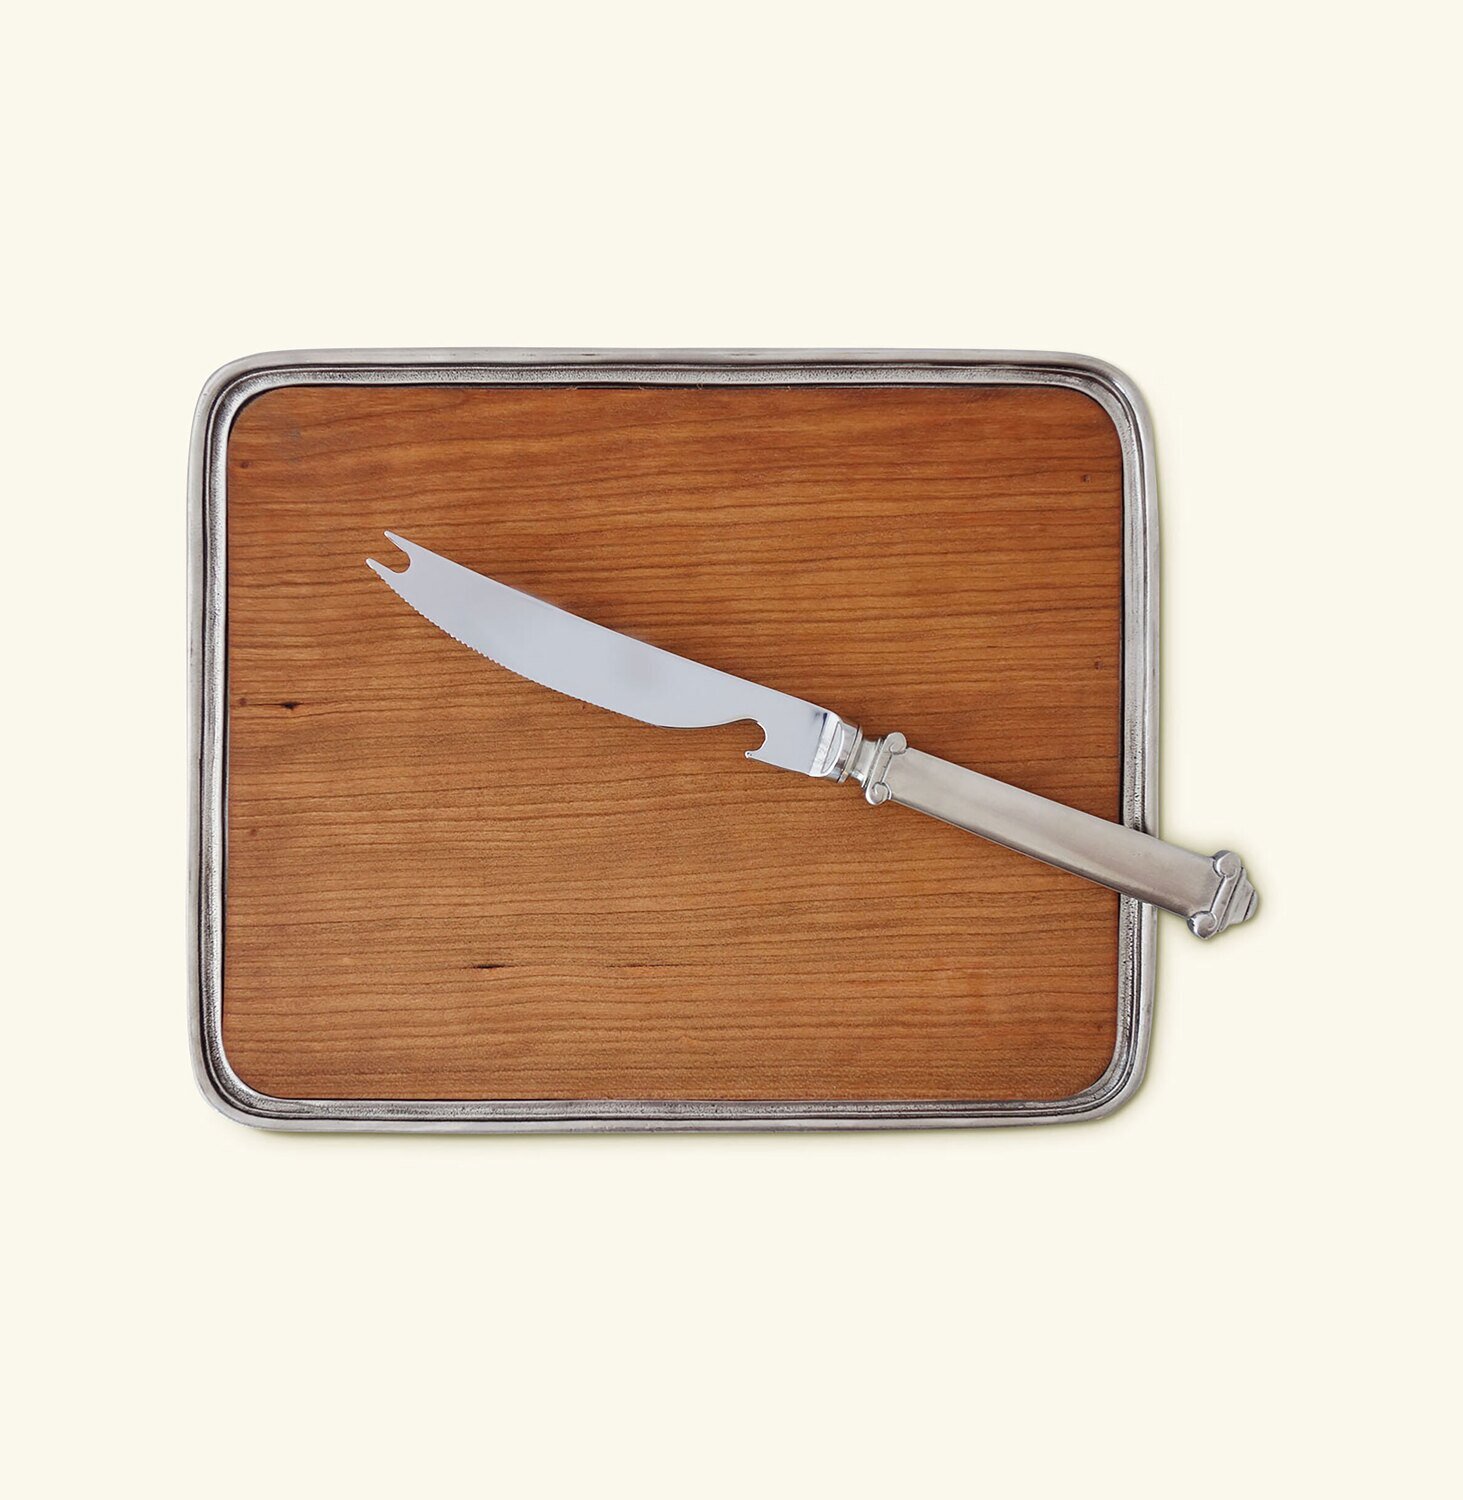 Match Pewter Bar Tray (1384.2) with Bar Knife Set 1384.5